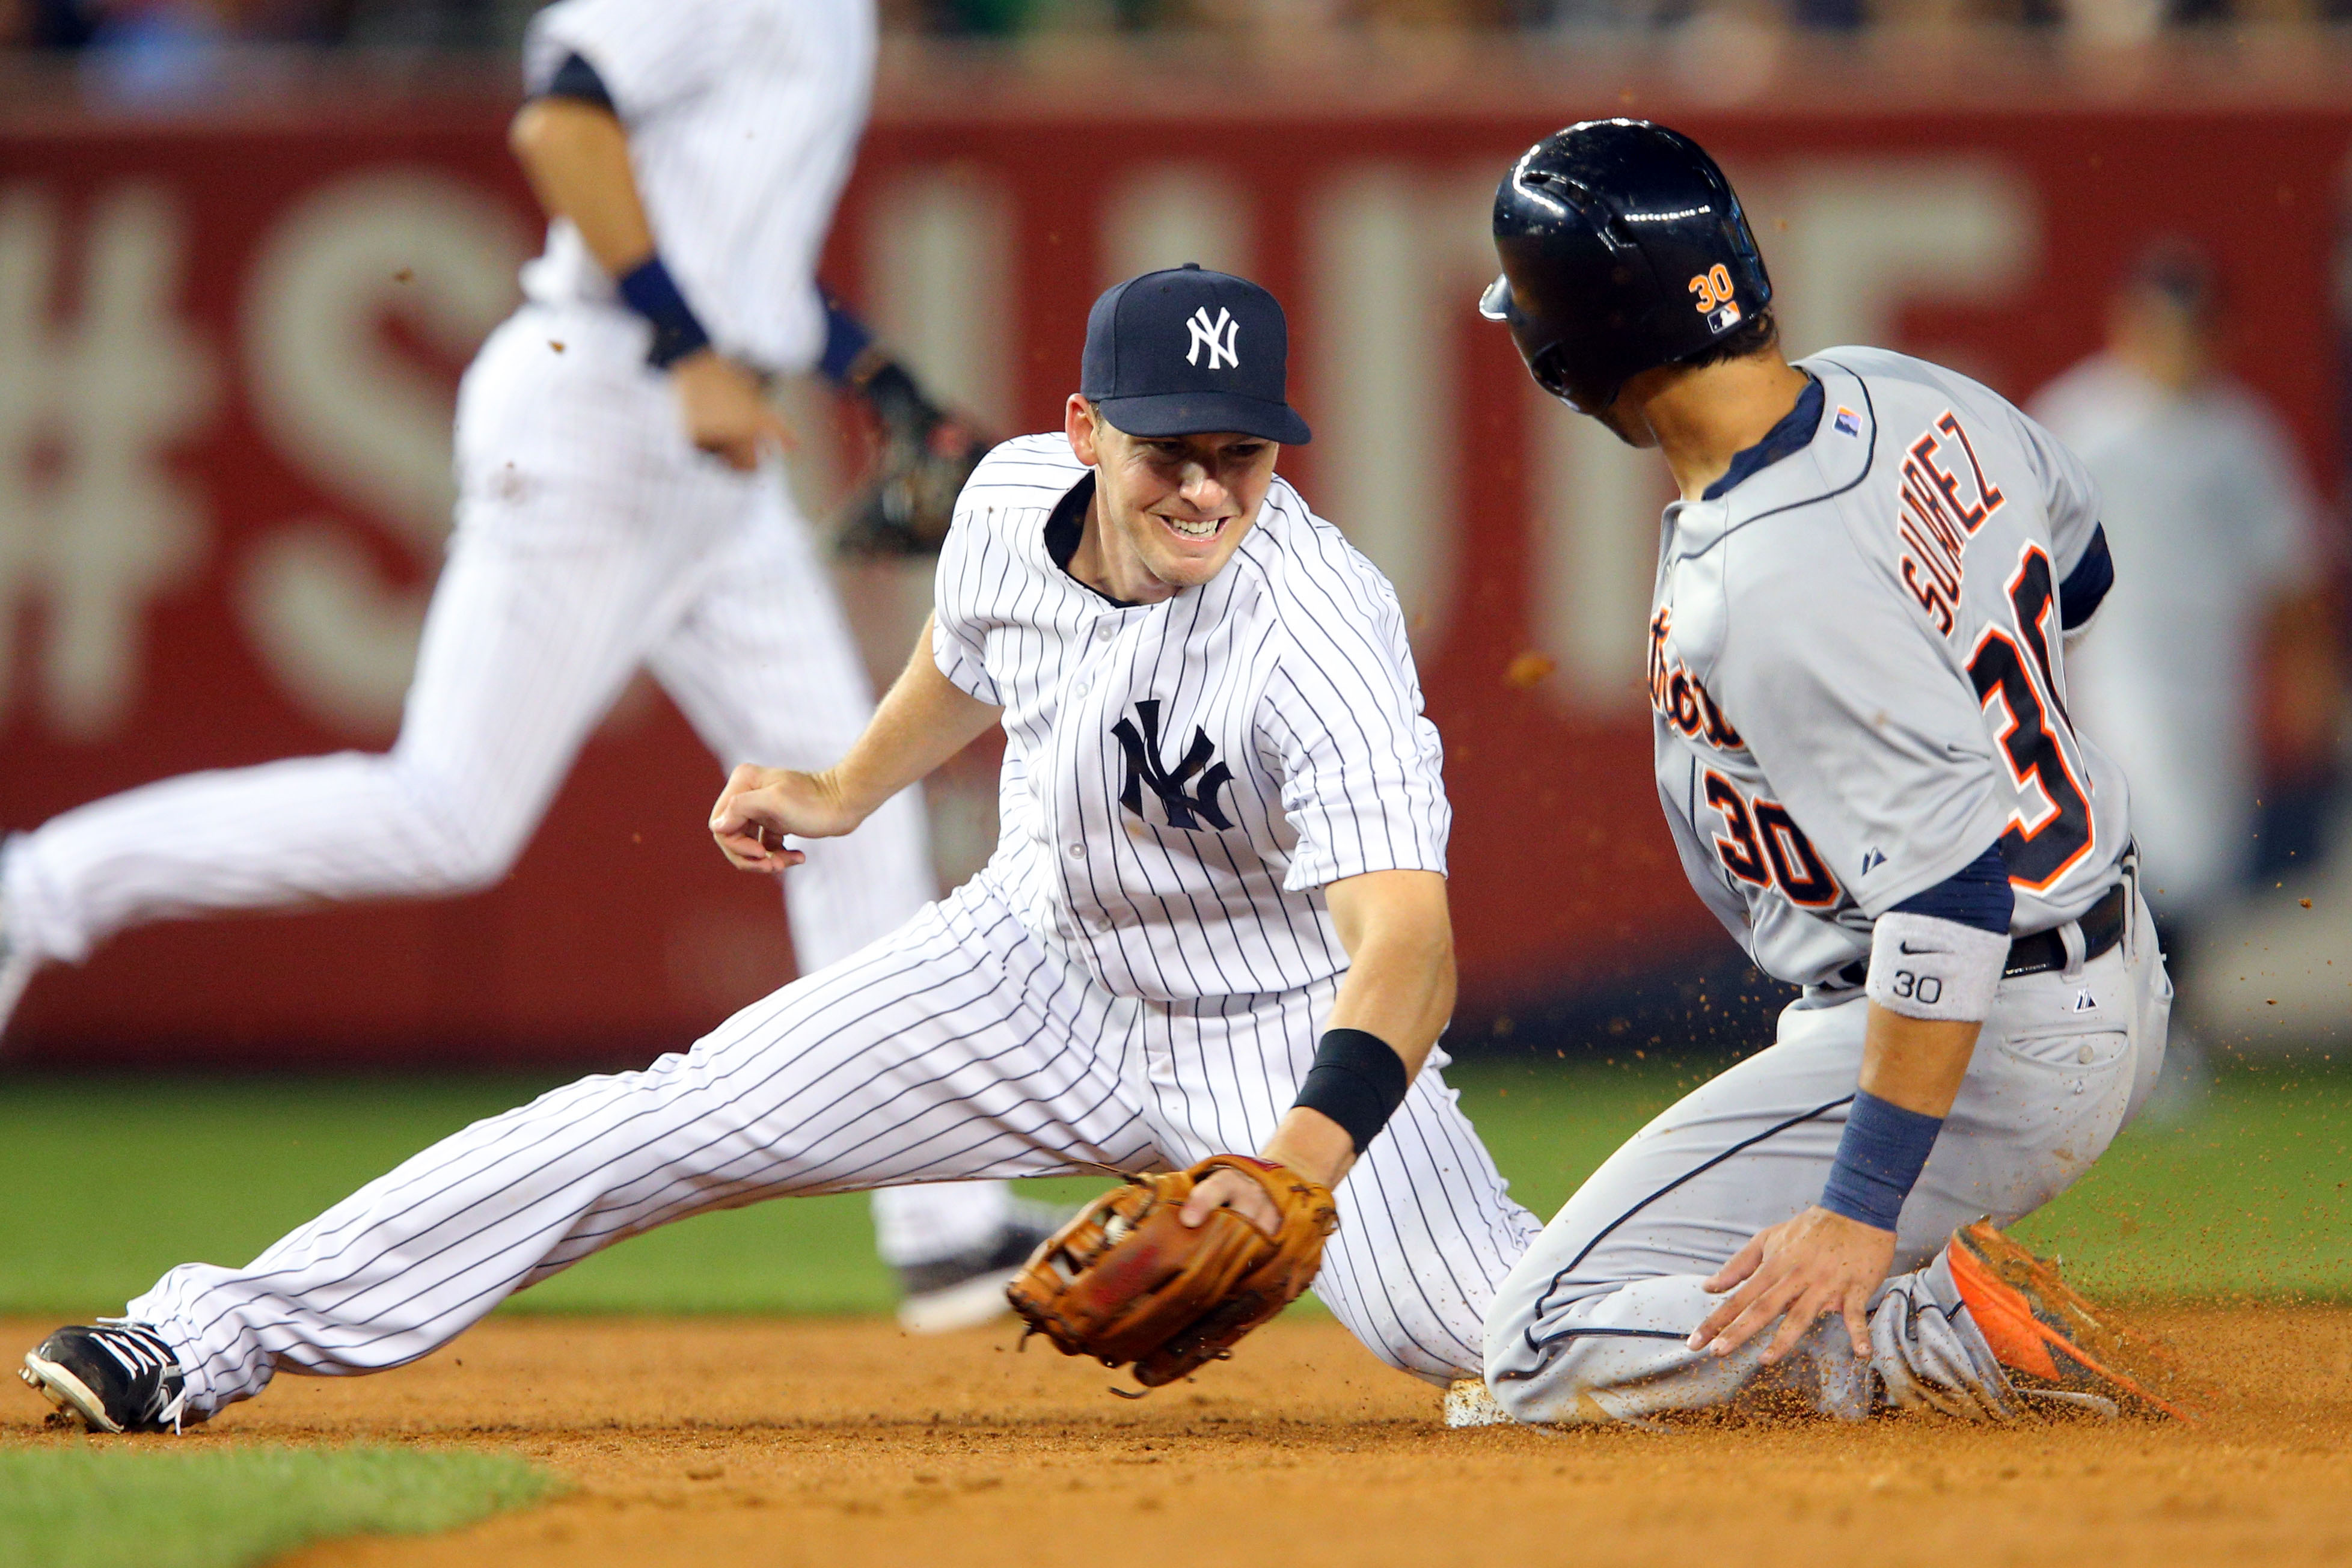 Detroit Tigers vs. NY Yankees Live Stream Watch Online Streaming MLB